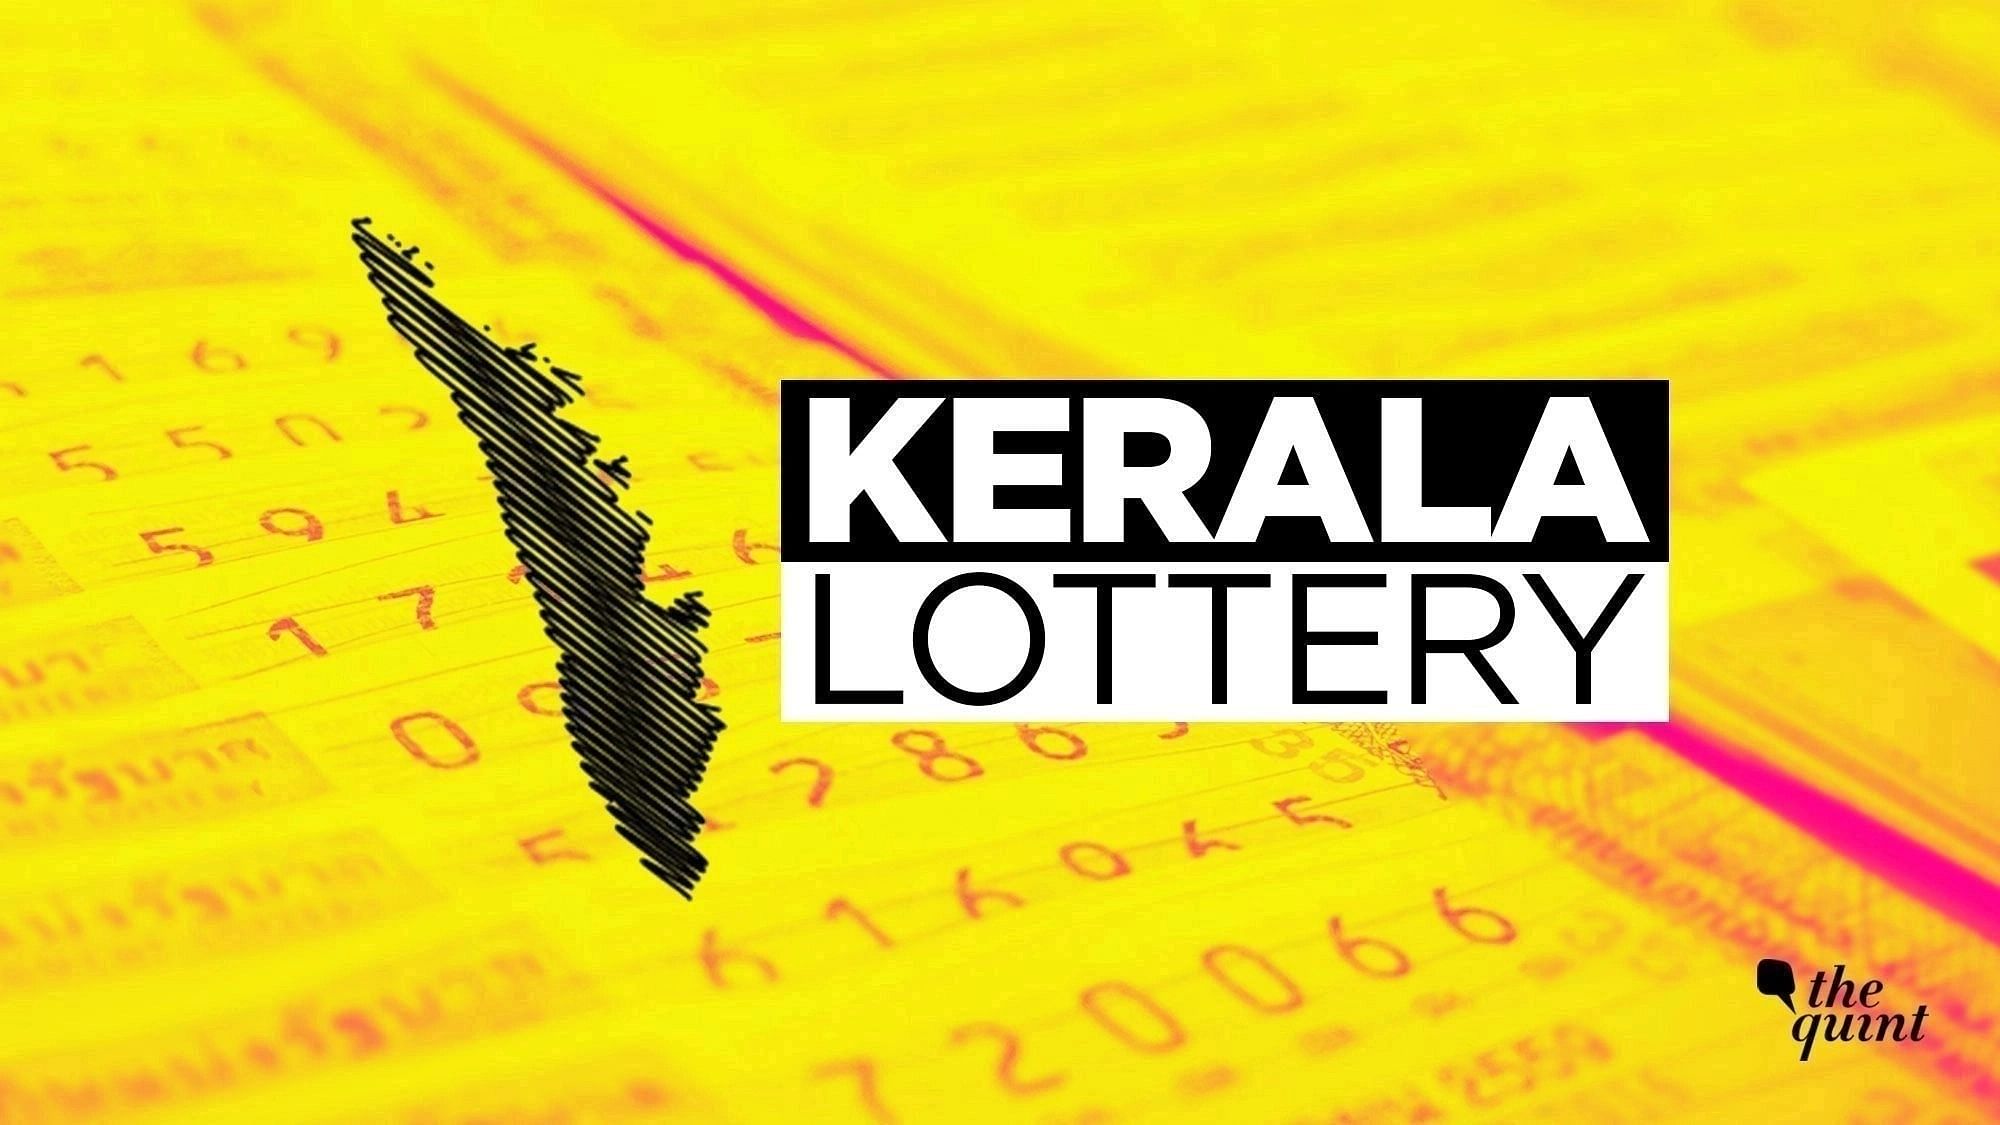 <div class="paragraphs"><p>The Kerala Lottery&nbsp;Nirmal NR draw prize money details are stated here.</p></div>